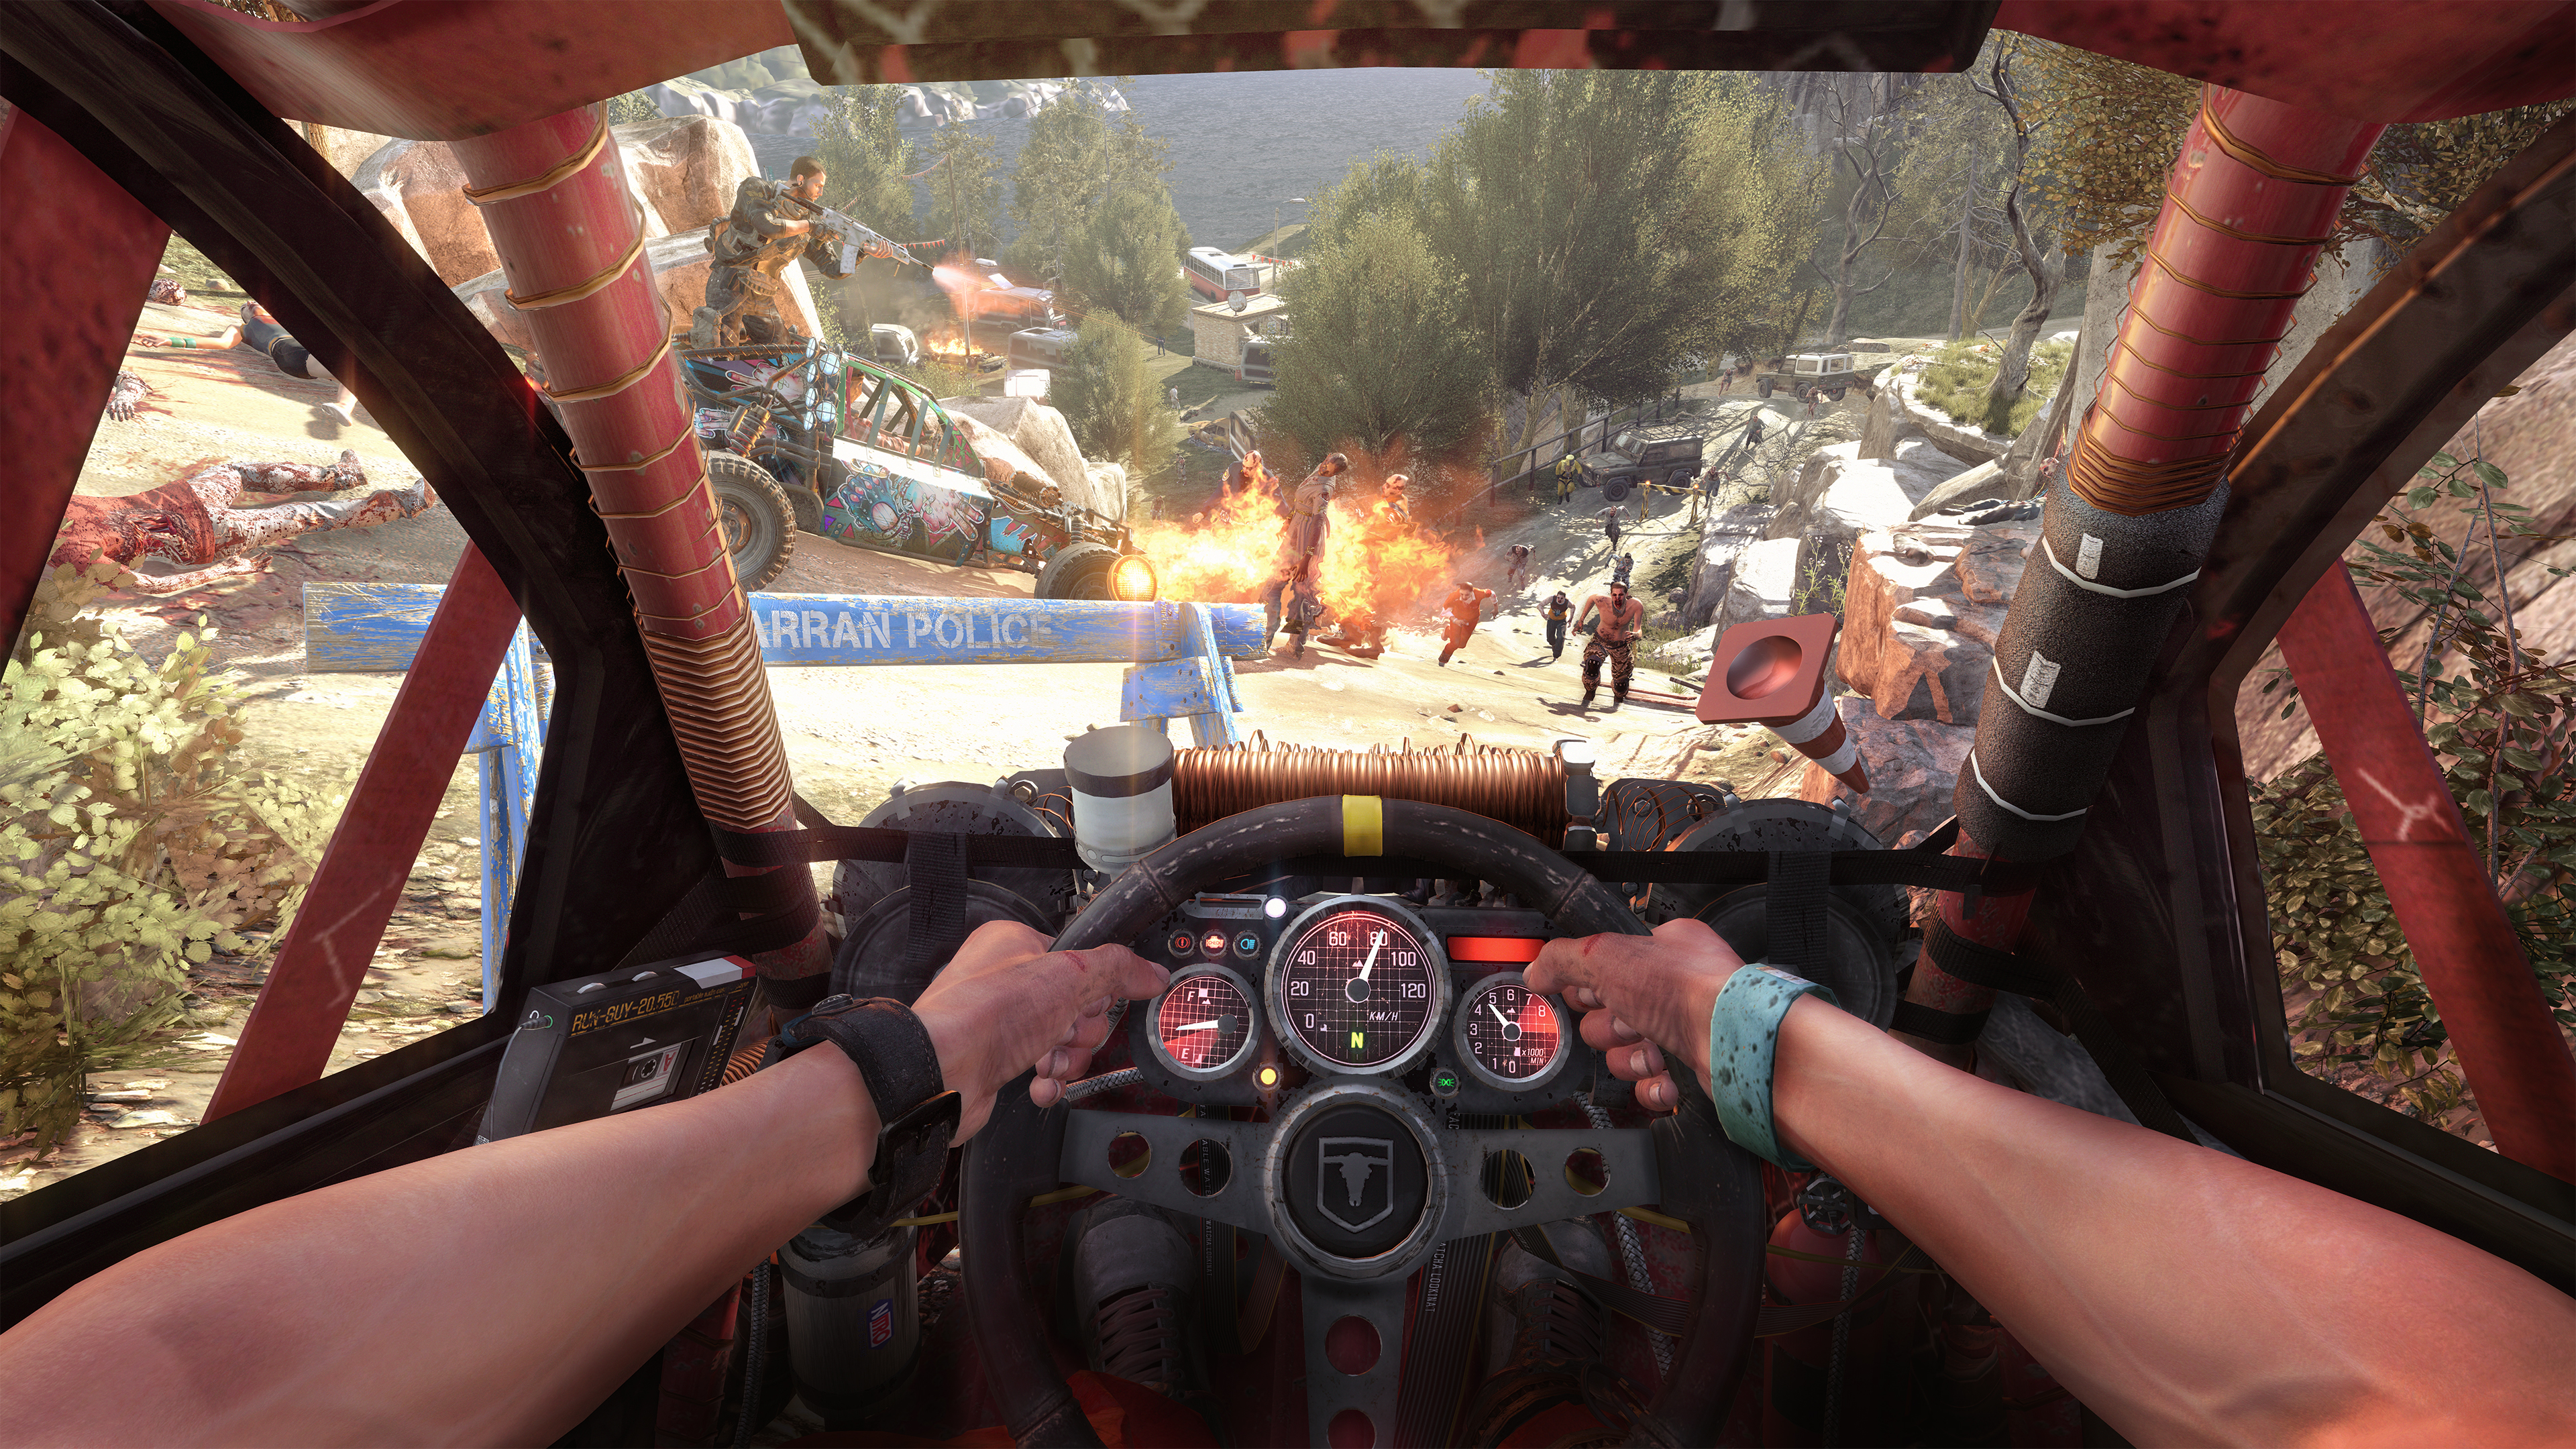 80% Dying Light: Definitive Edition on